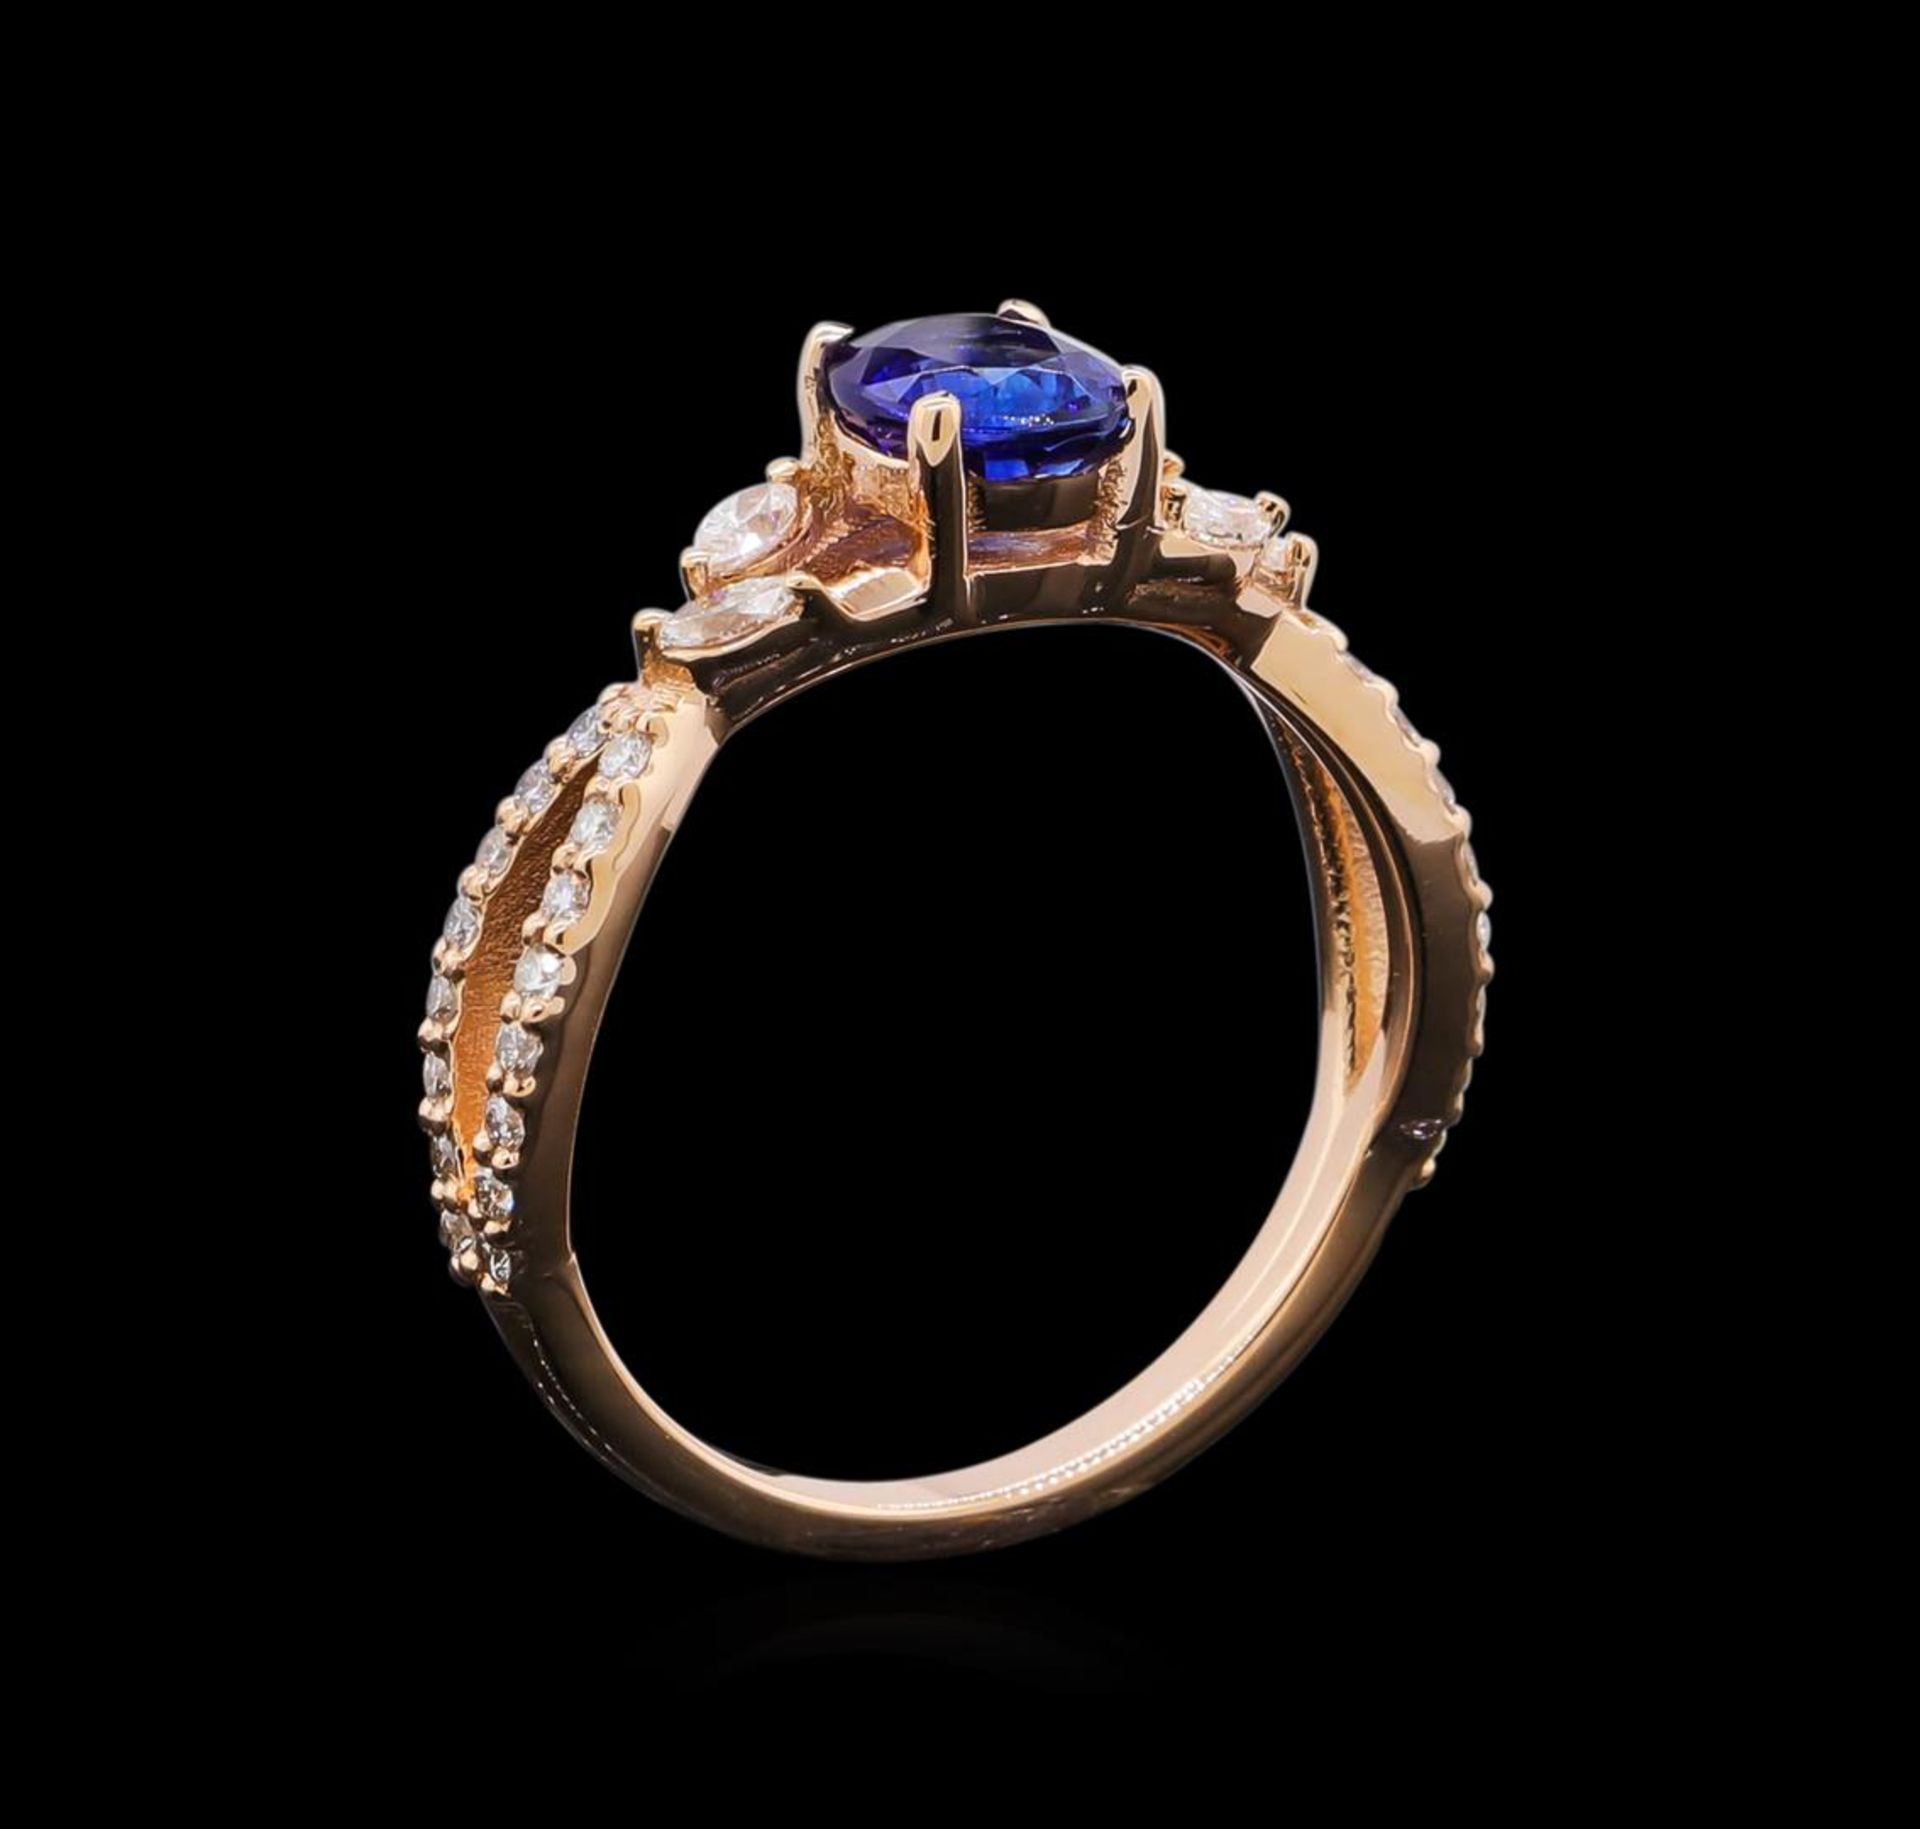 0.71 ctw Sapphire and Diamond Ring - 14KT Rose Gold - Image 4 of 4